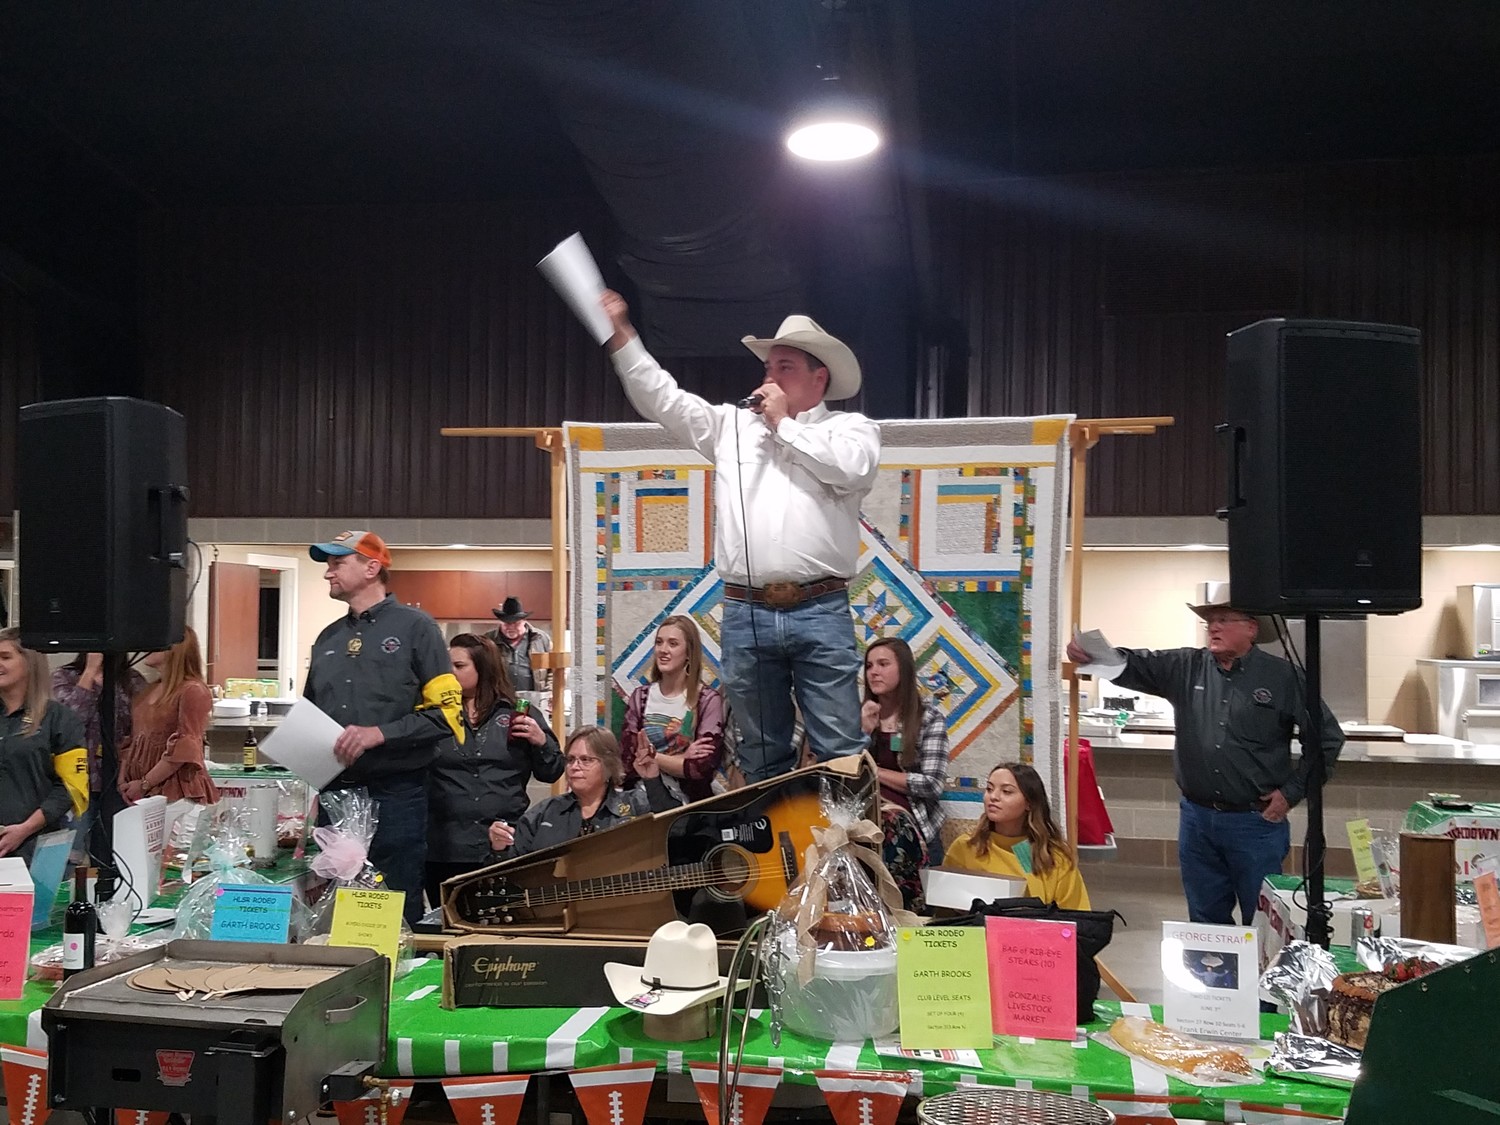 Auctioneer J.D. Shelton from Gonzales energized the Go Texas crowd at the JB Wells Expo Center on Saturday night.